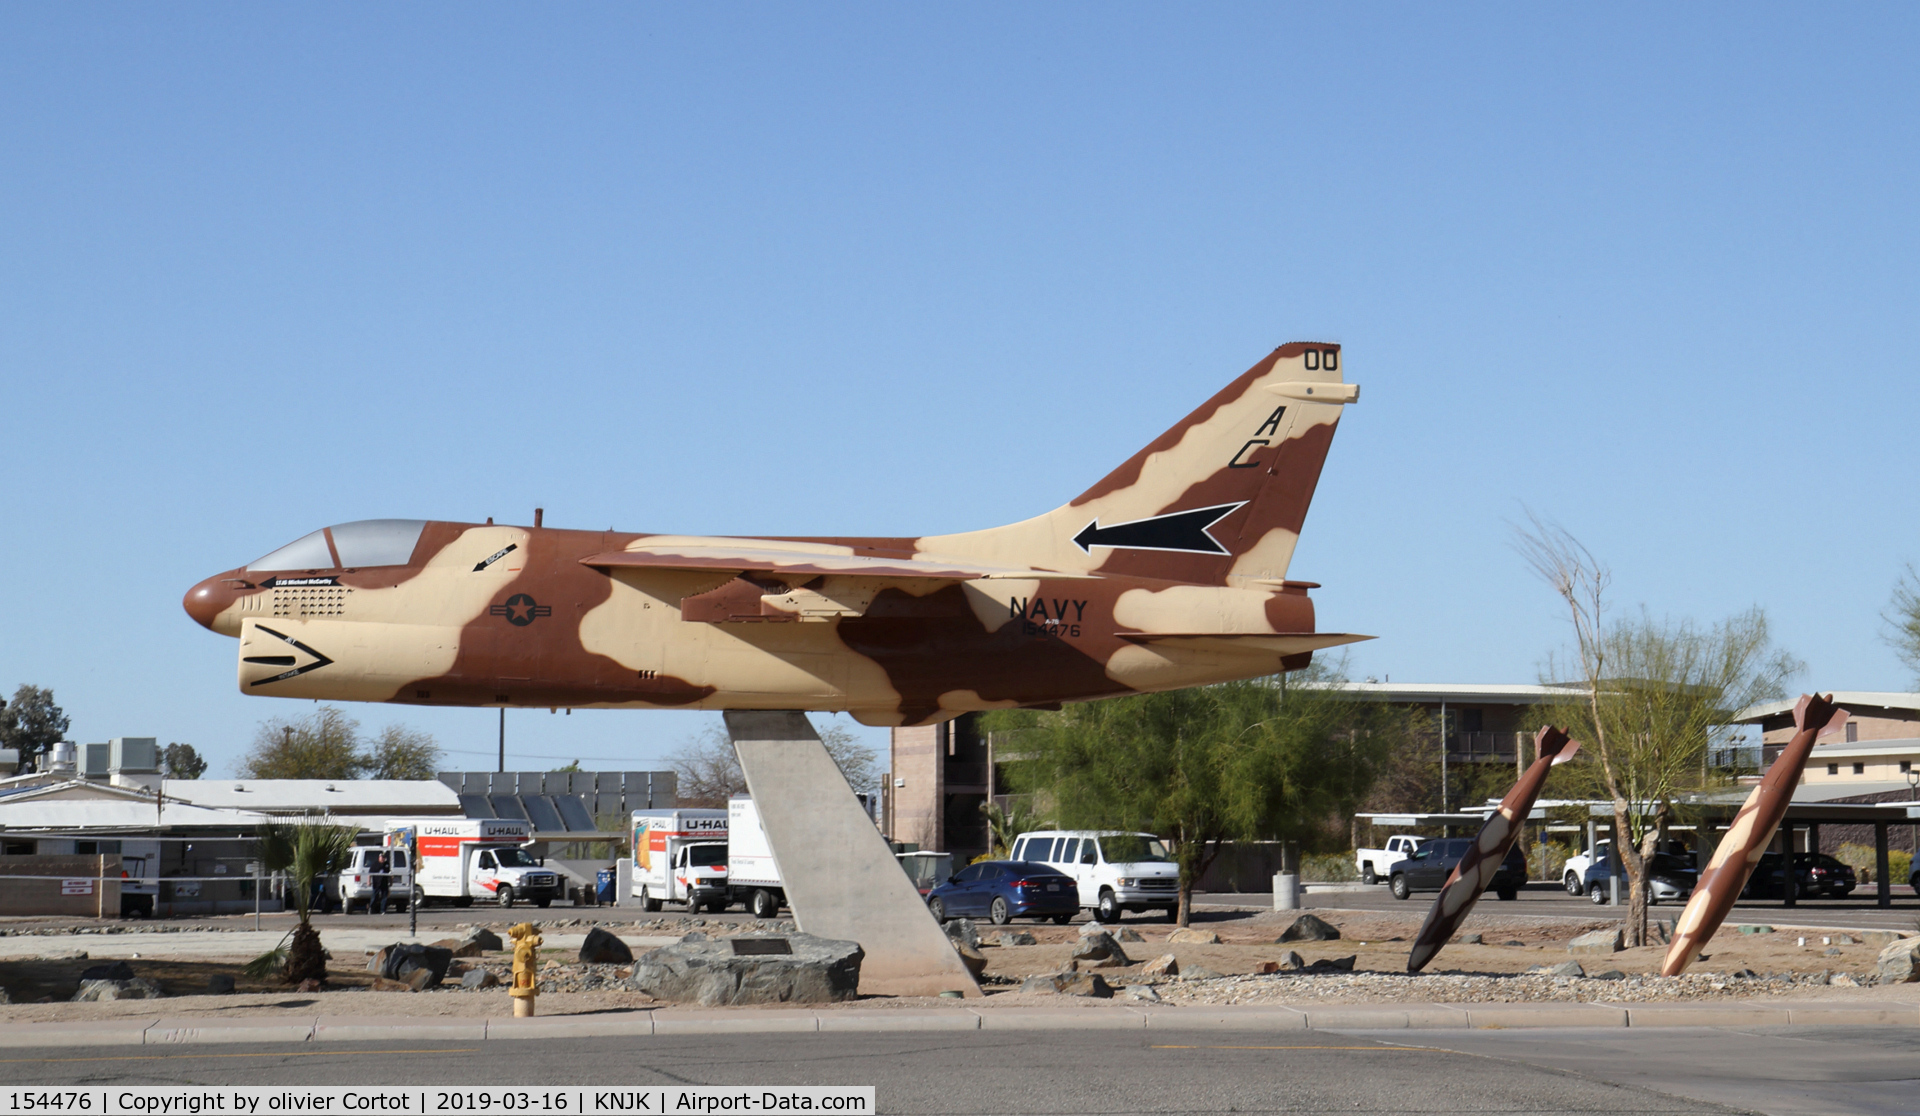 154476, LTV A-7B Corsair II C/N B-116, New paint job for my visit in march 2019